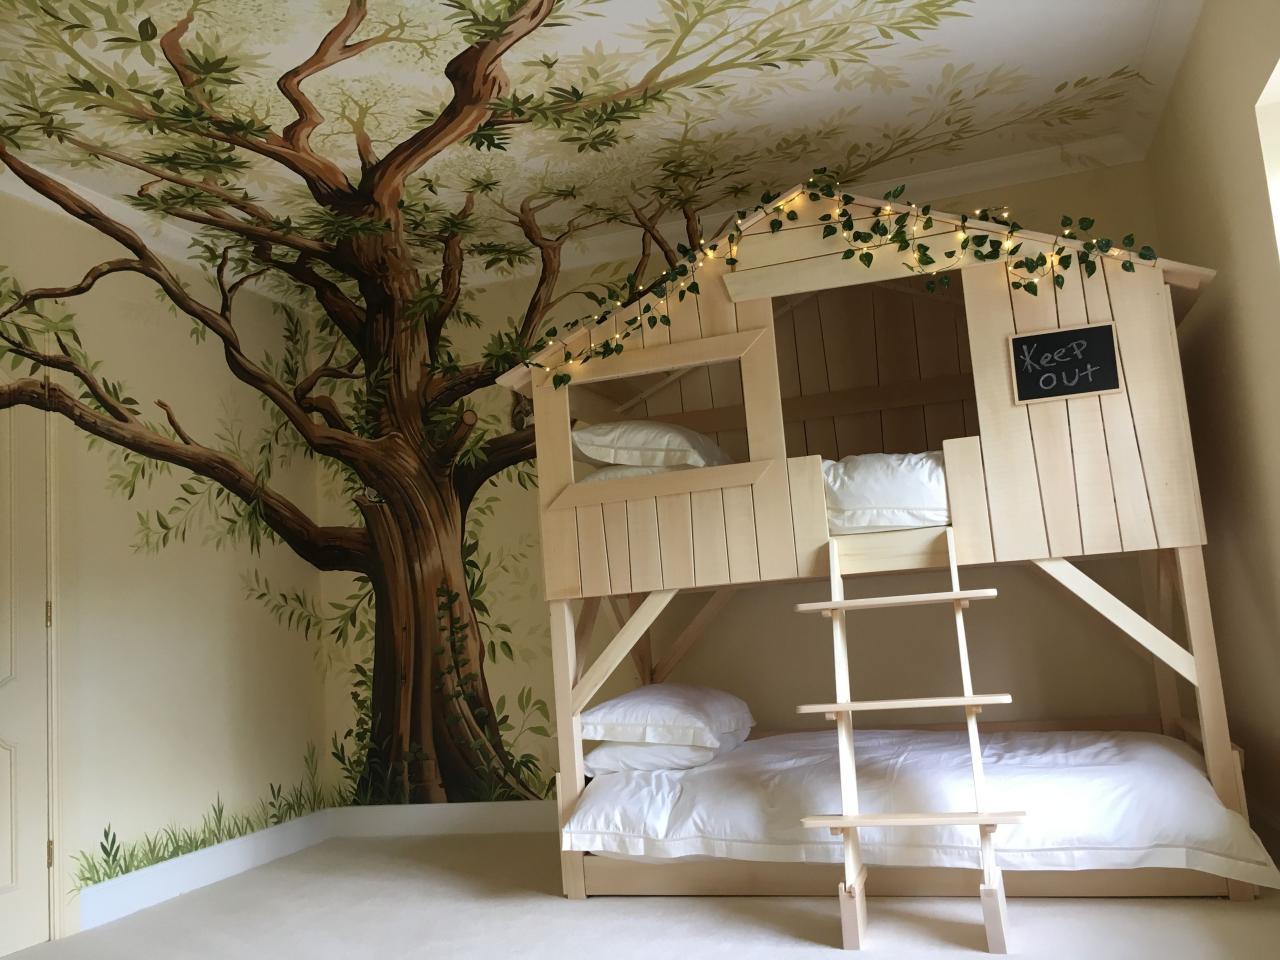 Whimsical and Playful Bedroom Themes for Kids